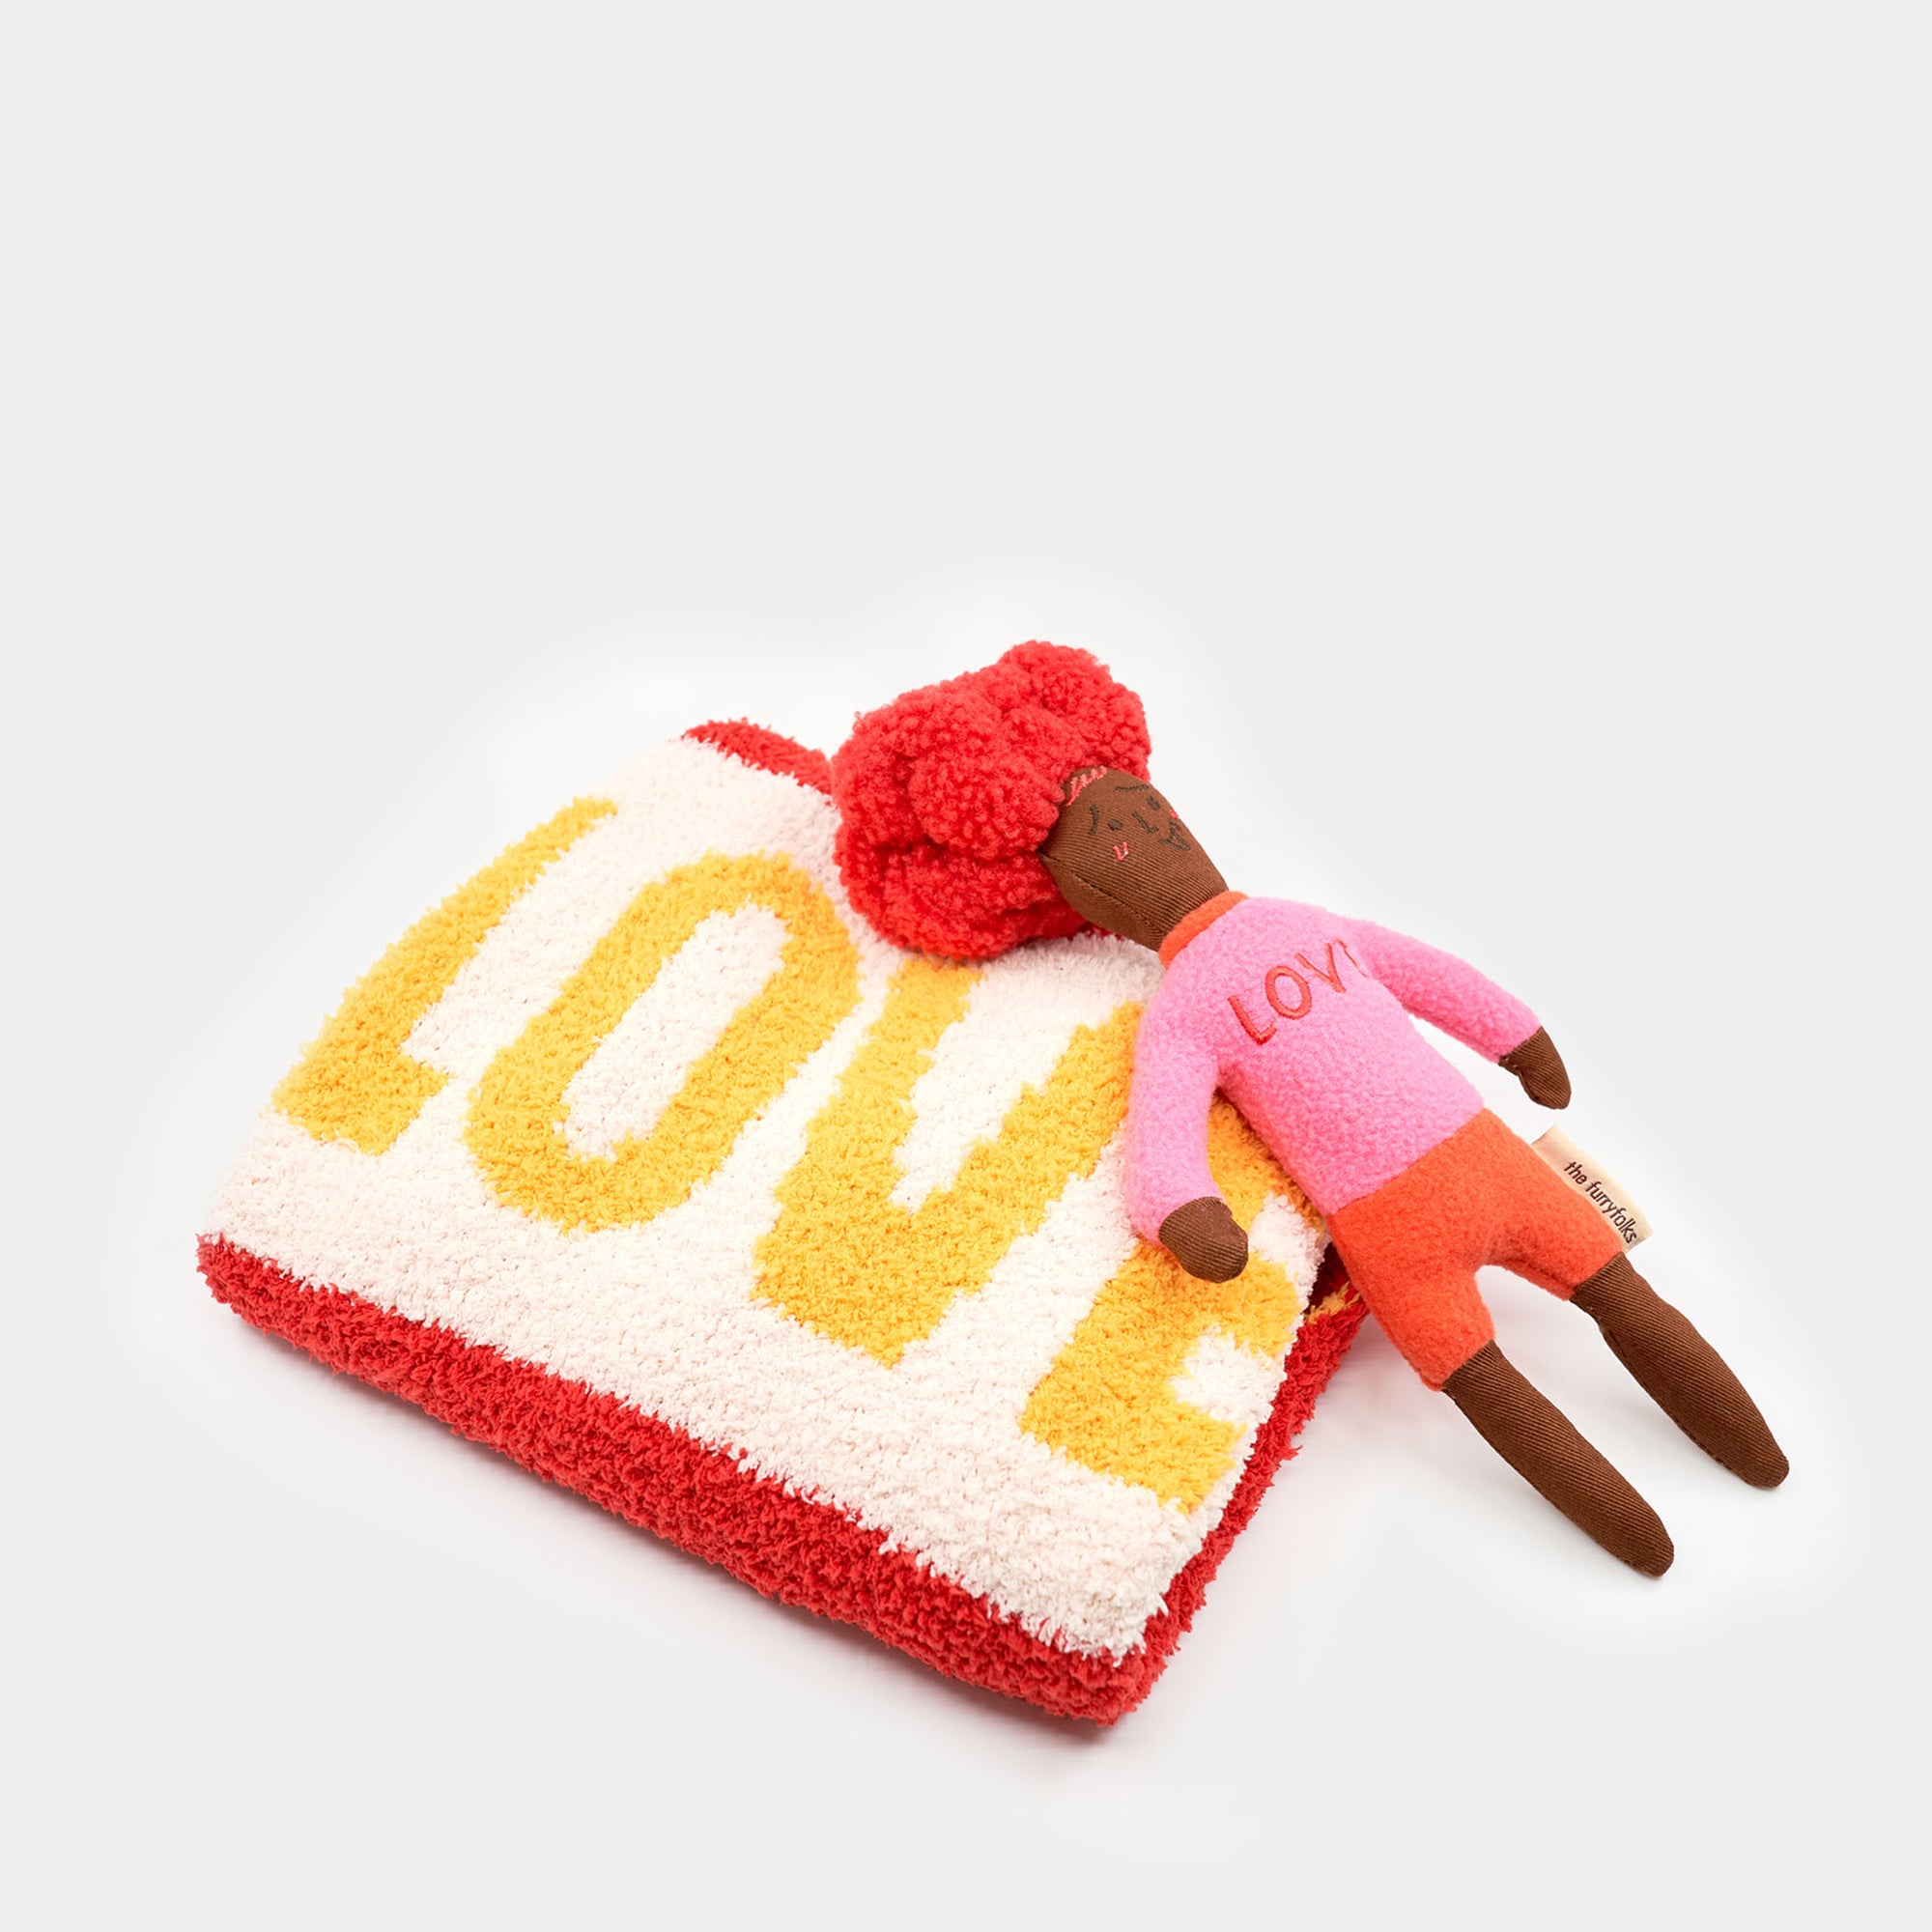 The photograph shows a red-haired, pink-shirted doll-shaped nosework toy resting on a plush dog bed with "LOVE" written in bold yellow letters. The toy's red pom-pom hair and pink "LOVE" shirt echo the bed's design, creating a thematic pairing that's visually appealing. This setup is likely designed to provide a comfortable and engaging environment for a dog, encouraging play and relaxation. The white background emphasizes the toy and bed's vibrant colors and the heartfelt message.